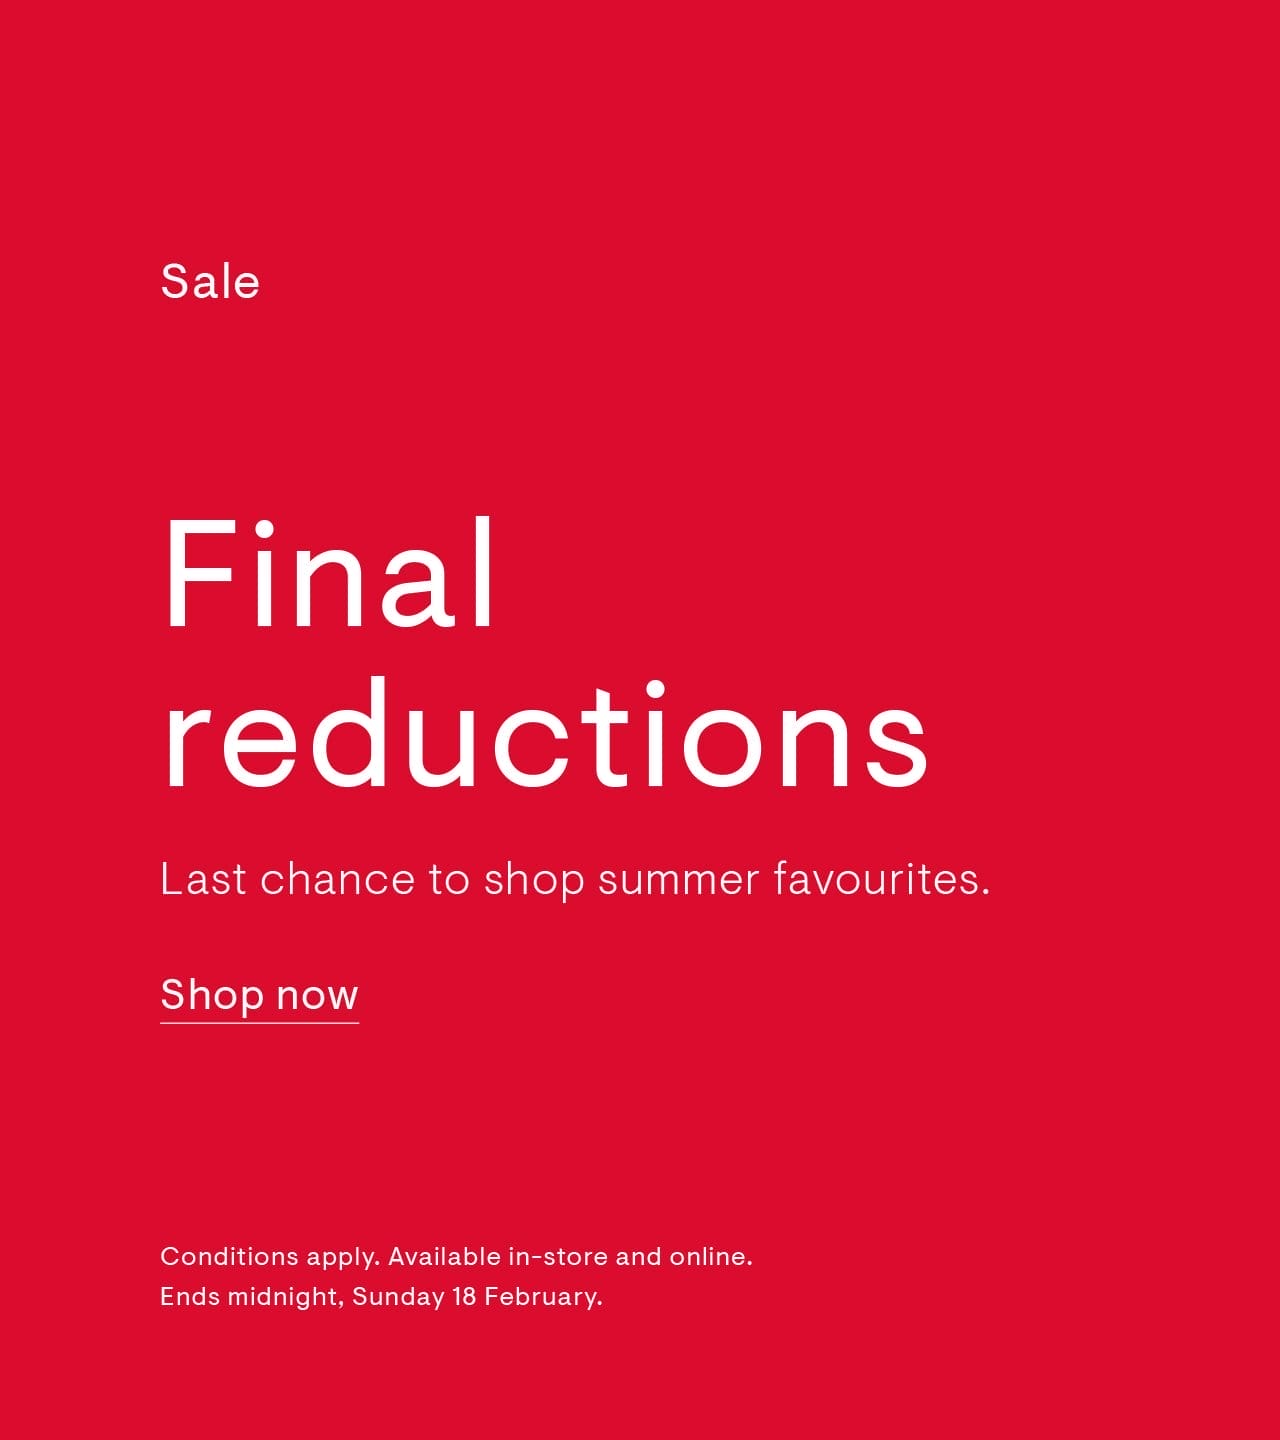 Final reductions: Last chance